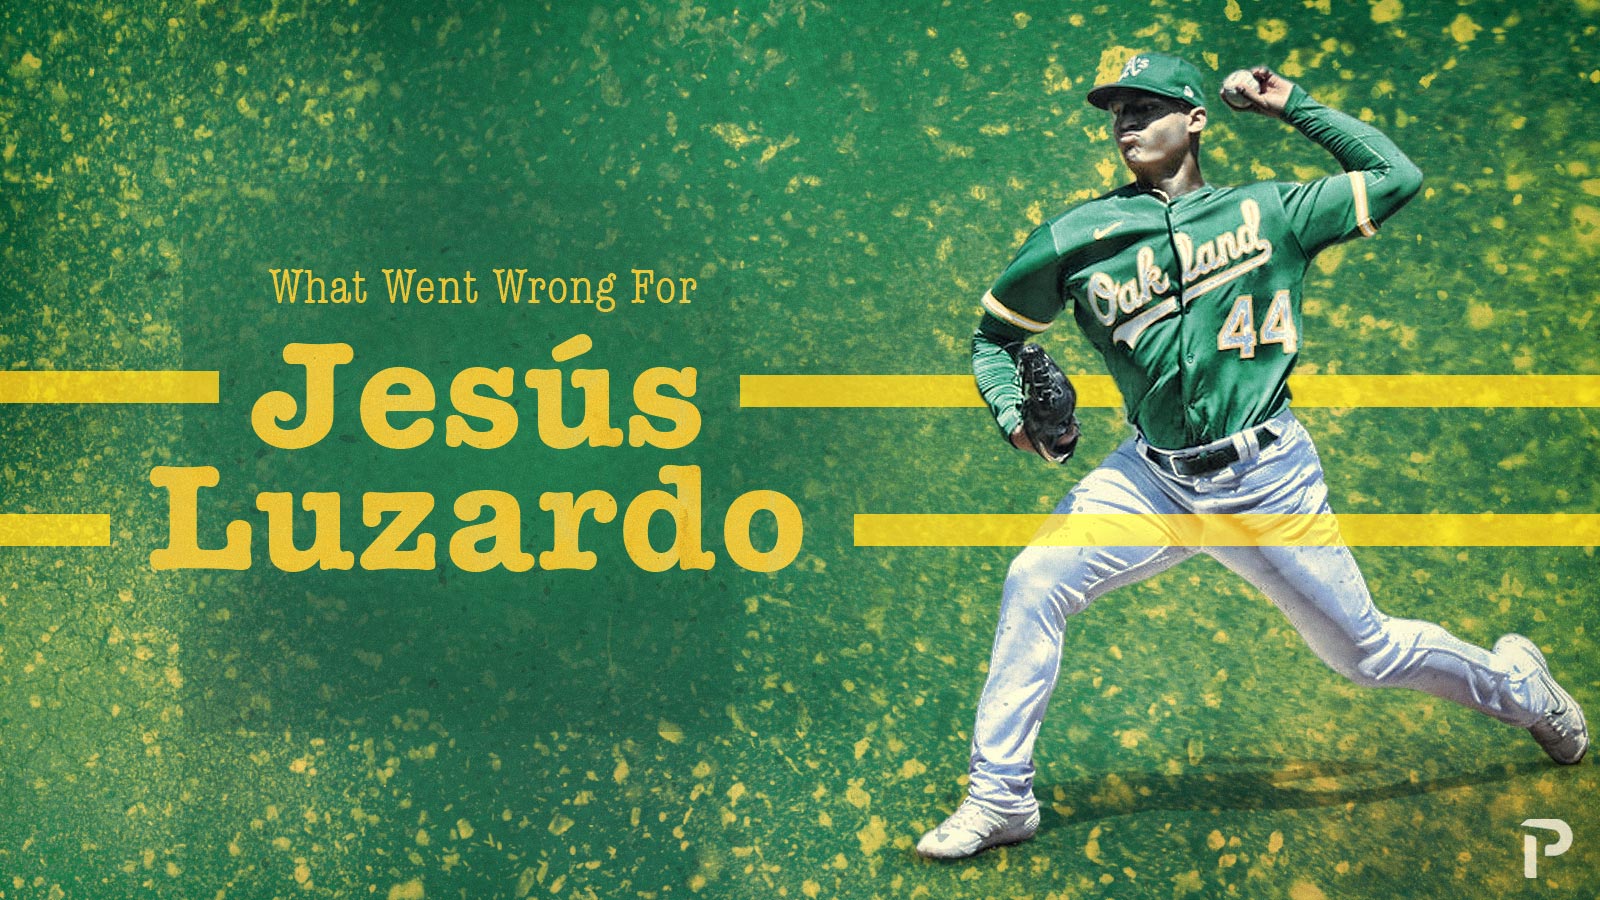 How does A's starting pitcher Jesús Luzardo generate his pitching